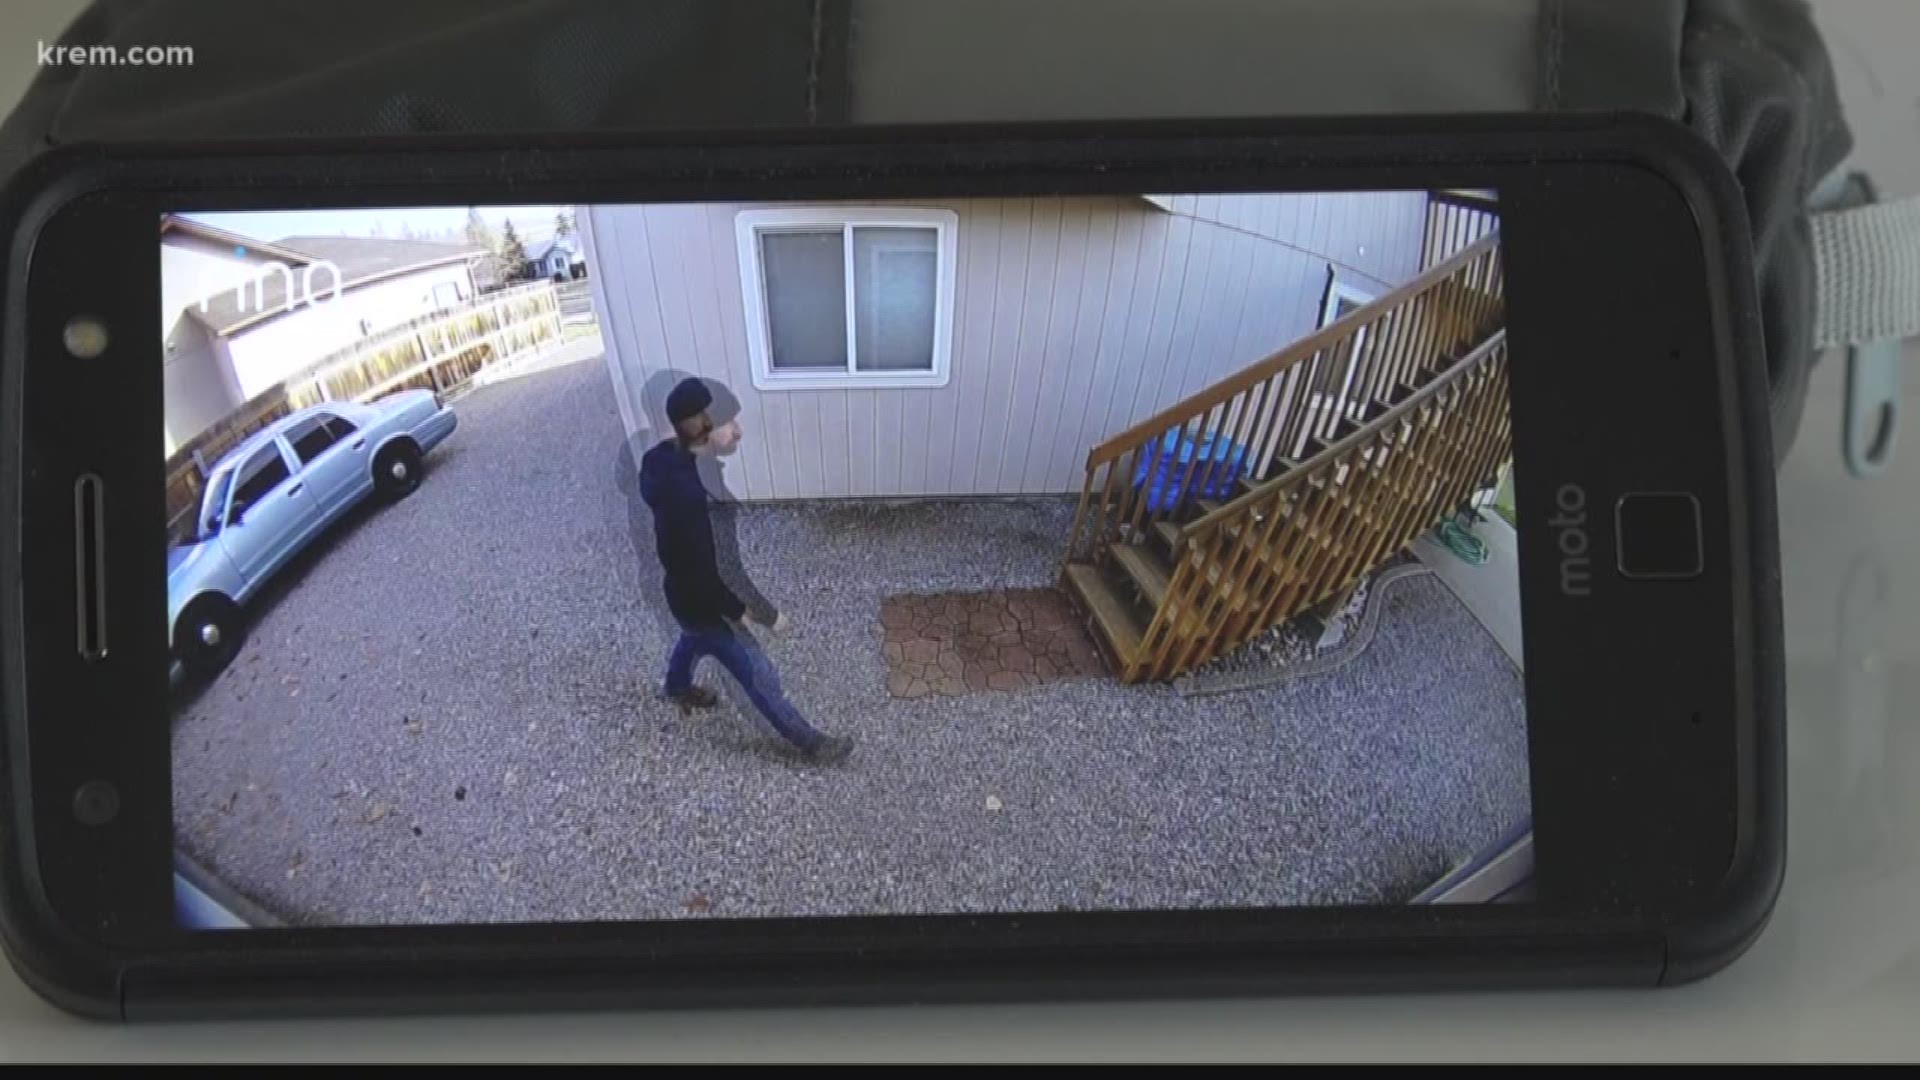 Package theft prevention goes digital